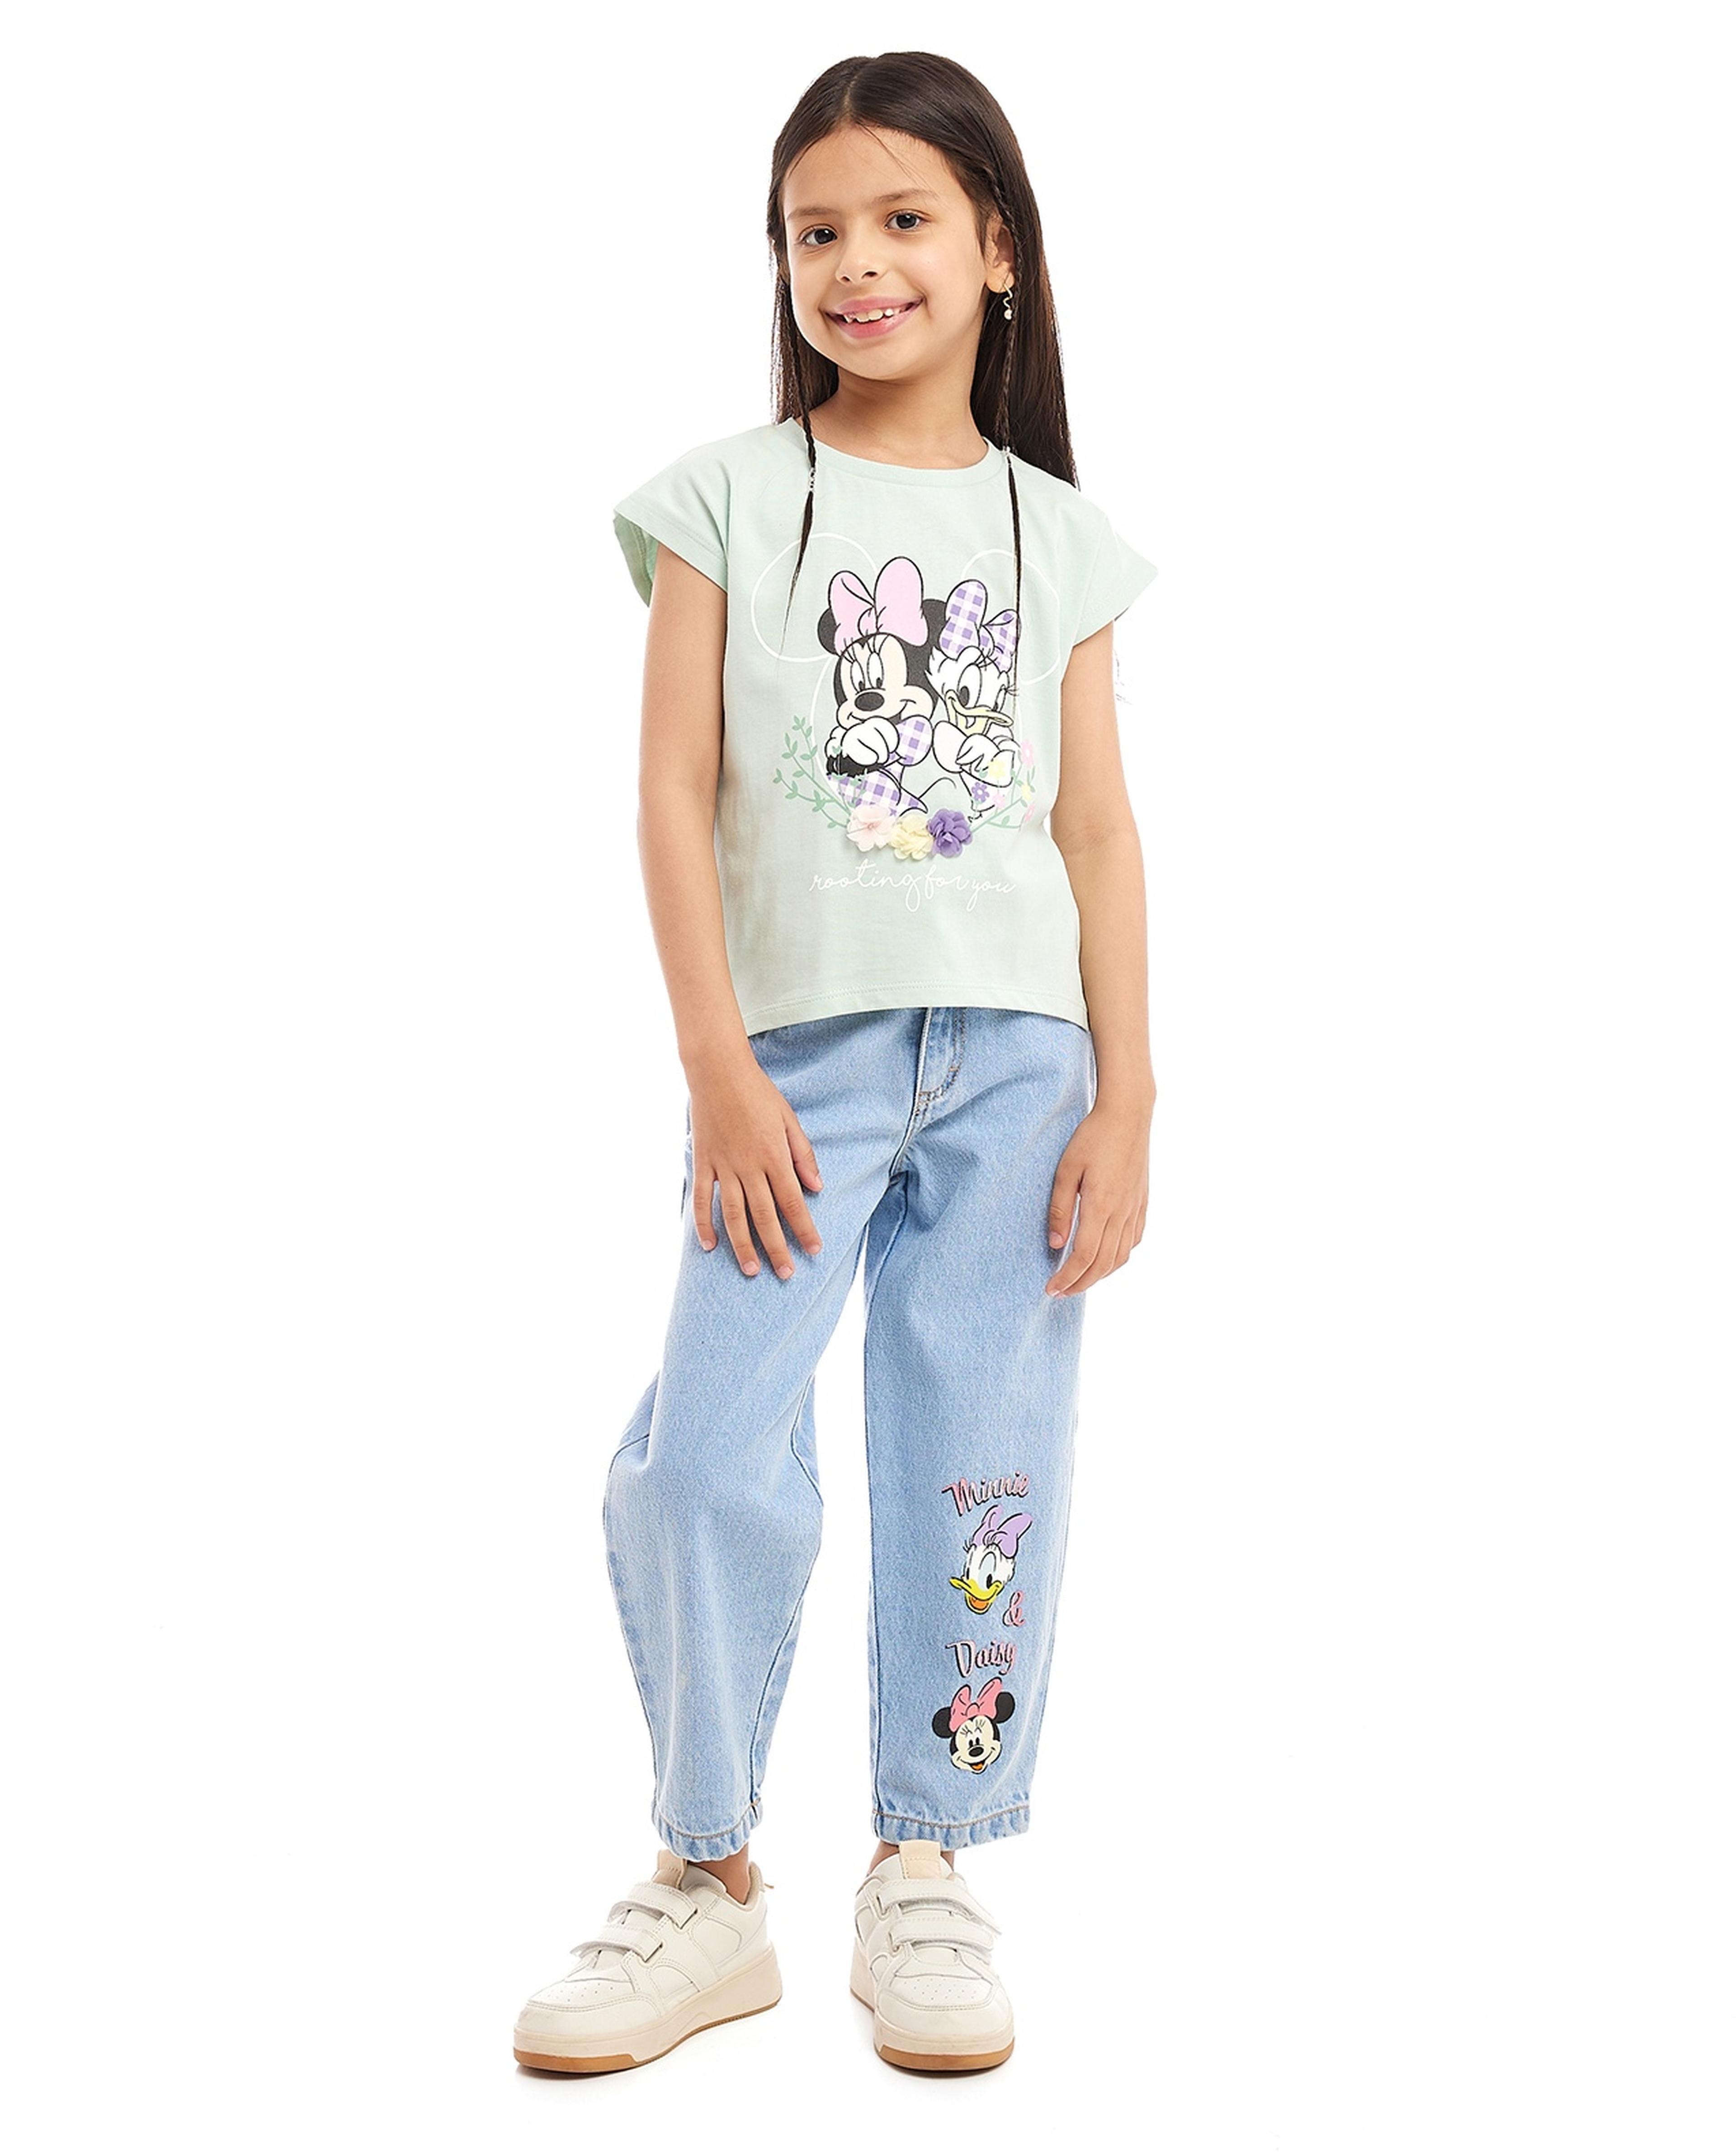 Minnie & Daisy Print T-Shirt with Crew Neck and Short Sleeves